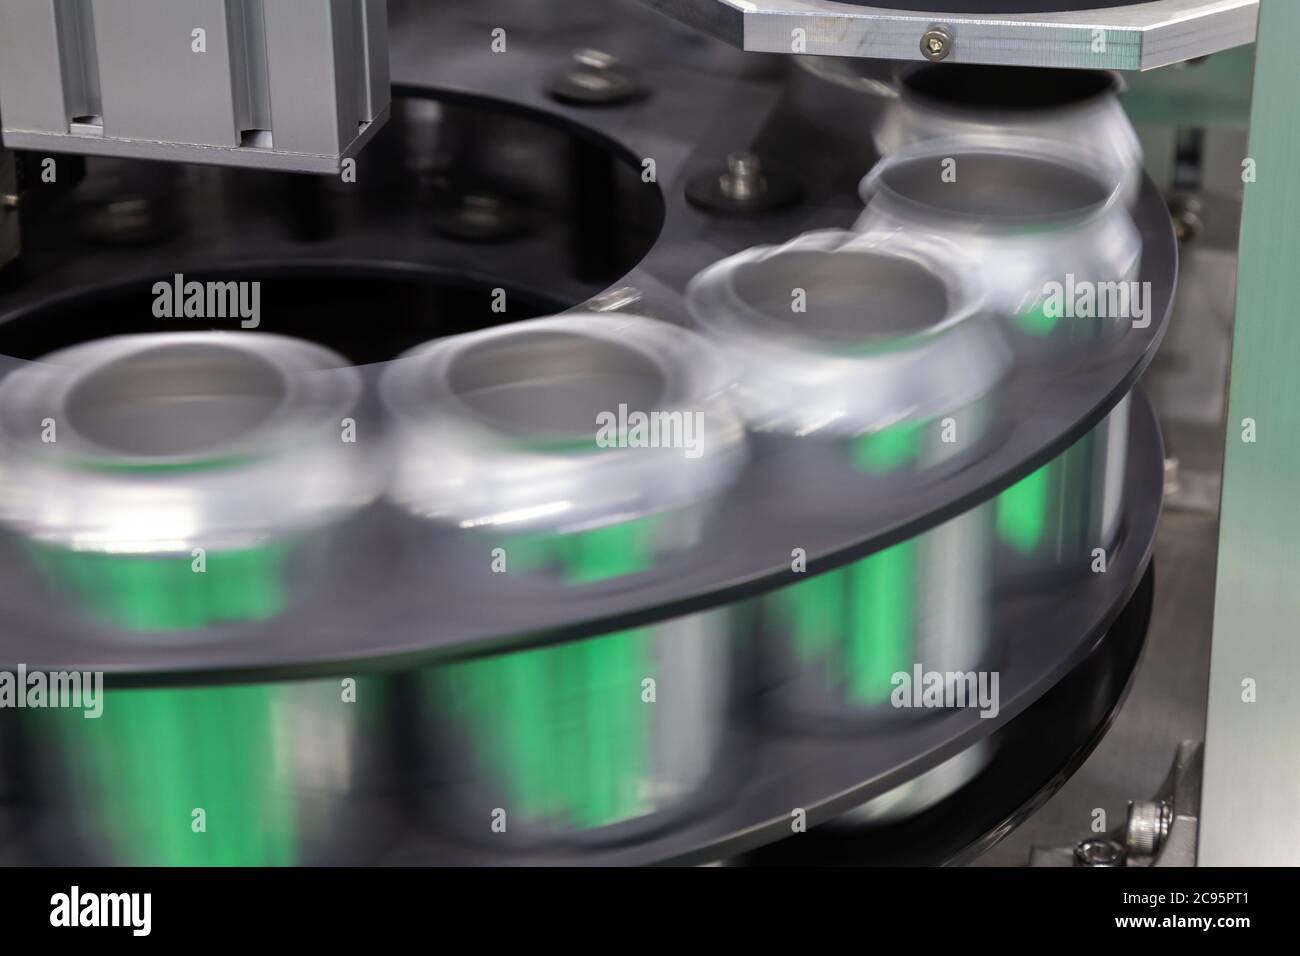 https://c8.alamy.com/comp/2C95PT1/empty-new-aluminum-cans-for-drink-process-are-moving-in-factory-line-on-conveyor-belt-machine-at-beverage-manufacturing-food-and-beverage-industrial-2C95PT1.jpg